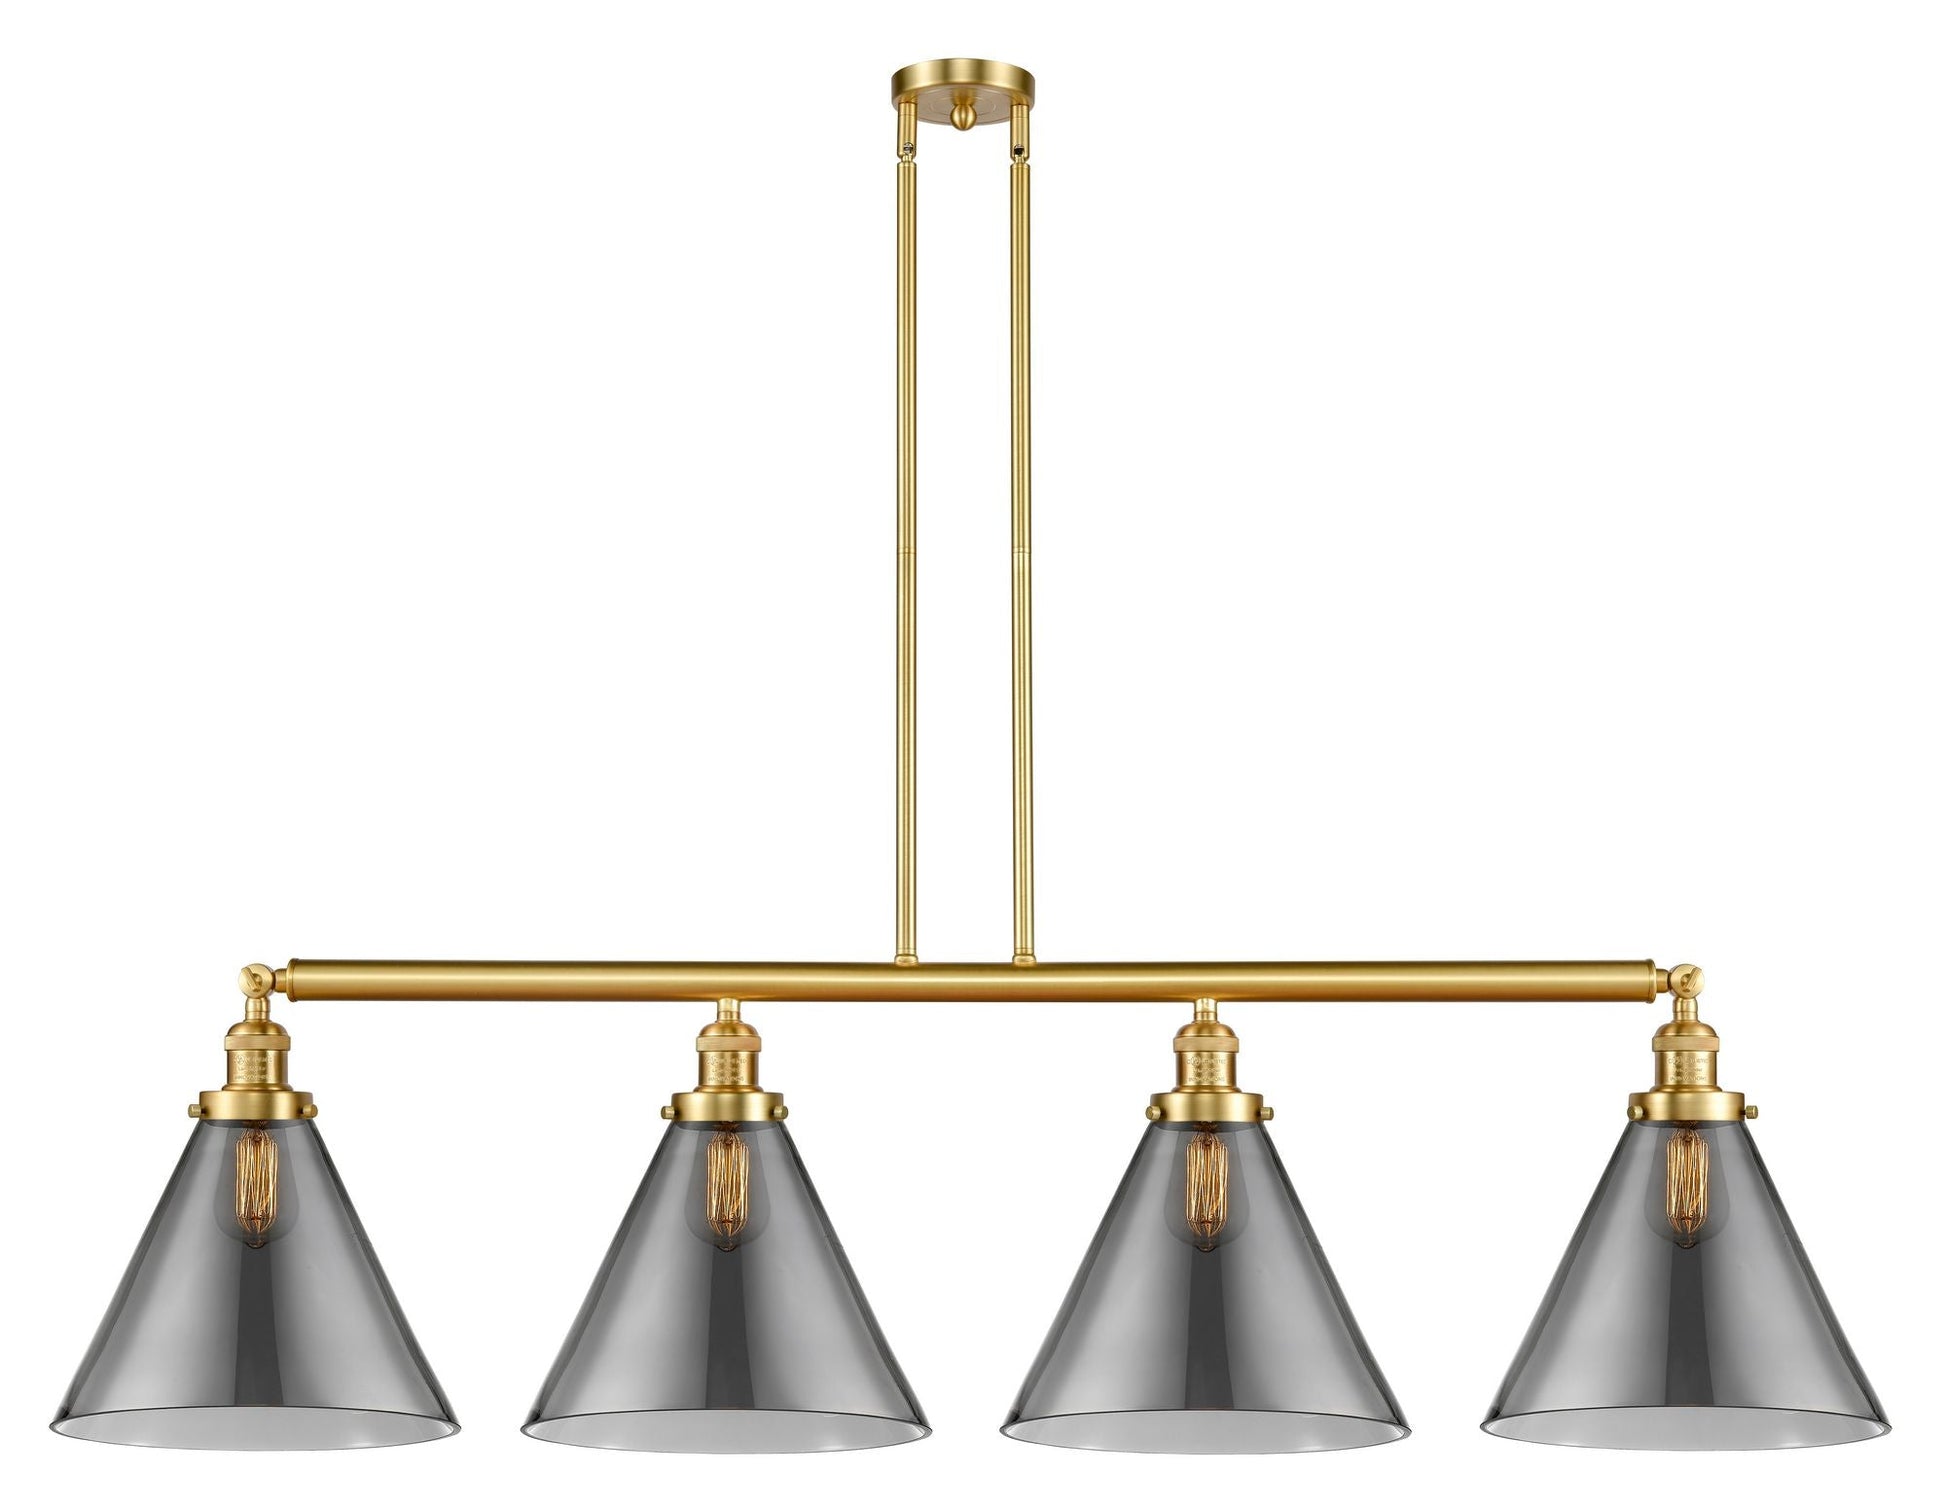 214-SG-G43-L 4-Light 56" Satin Gold Island Light - Plated Smoke Cone 12" Glass - LED Bulb - Dimmensions: 56 x 12 x 14<br>Minimum Height : 24.25<br>Maximum Height : 48.25 - Sloped Ceiling Compatible: Yes